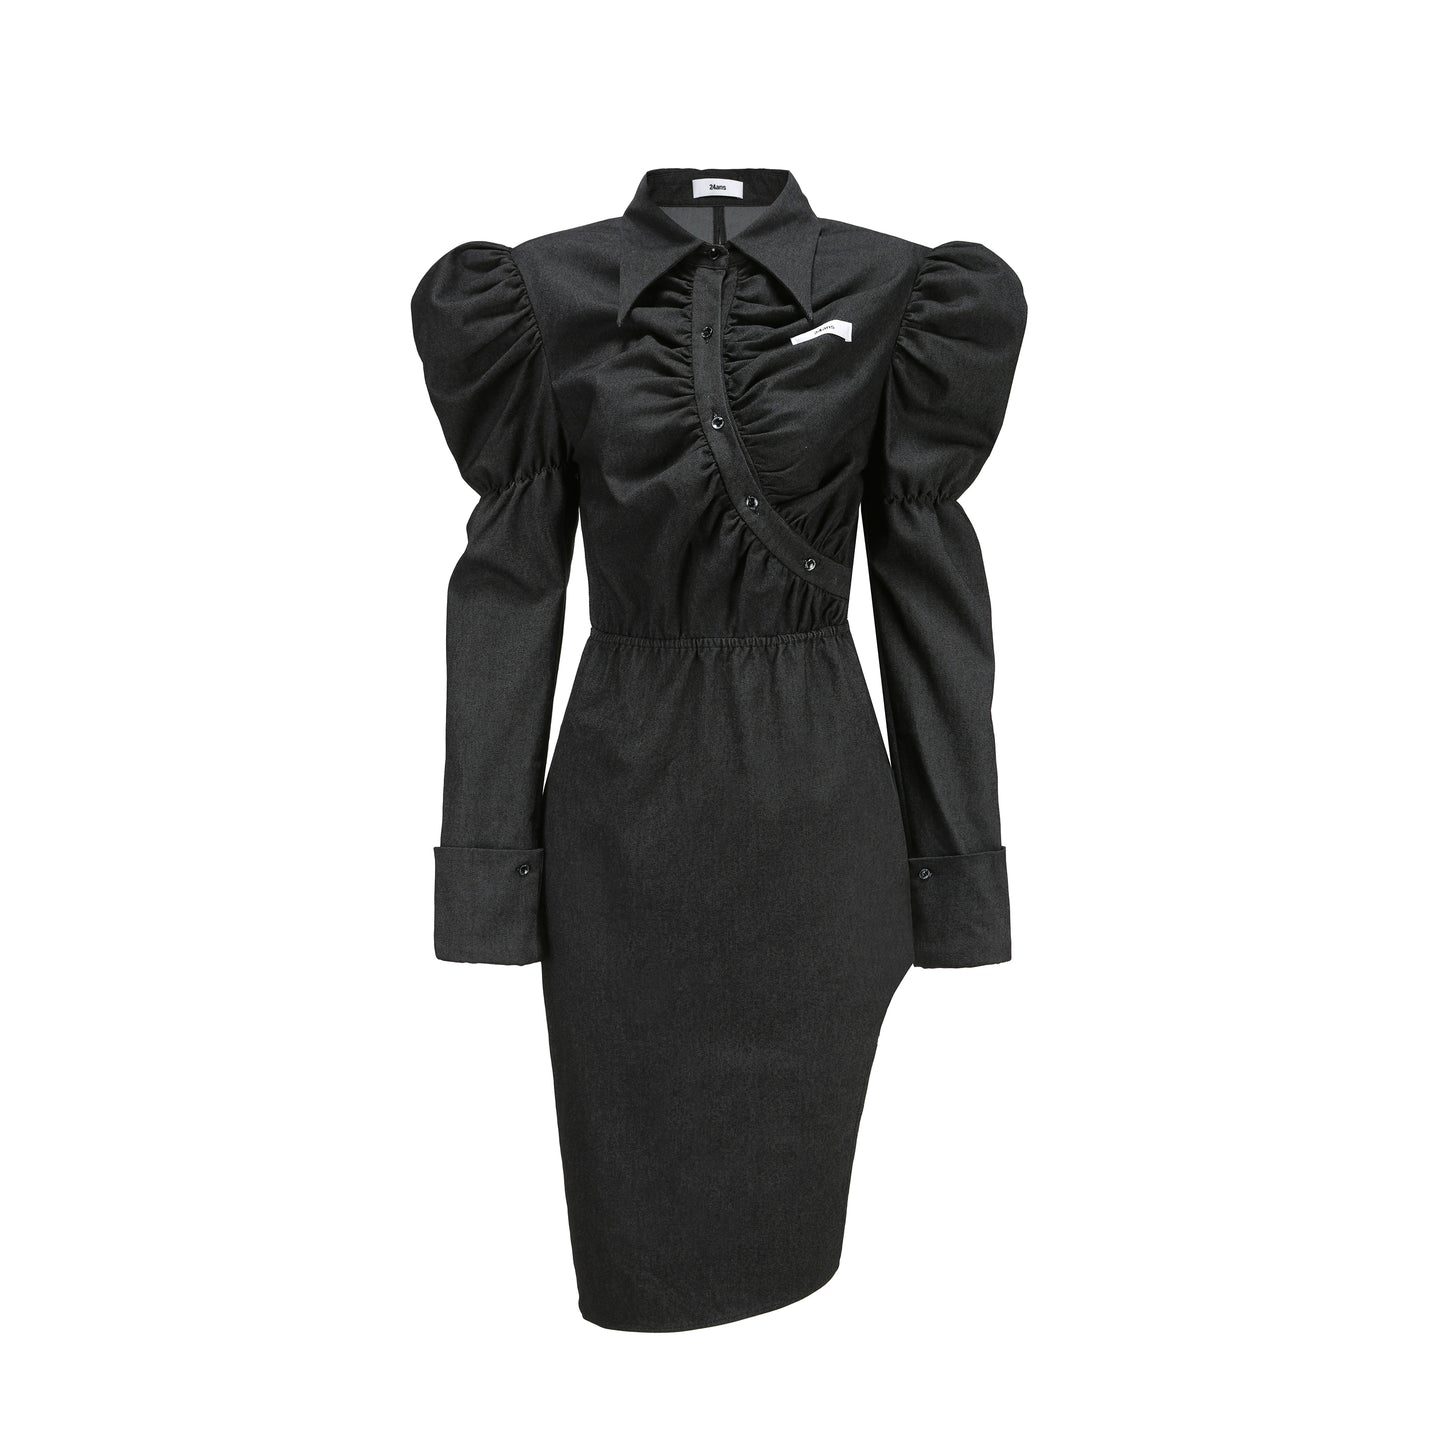 Bubble Sleeve Dress - Ideal for Exhibitions/Dates/Parties